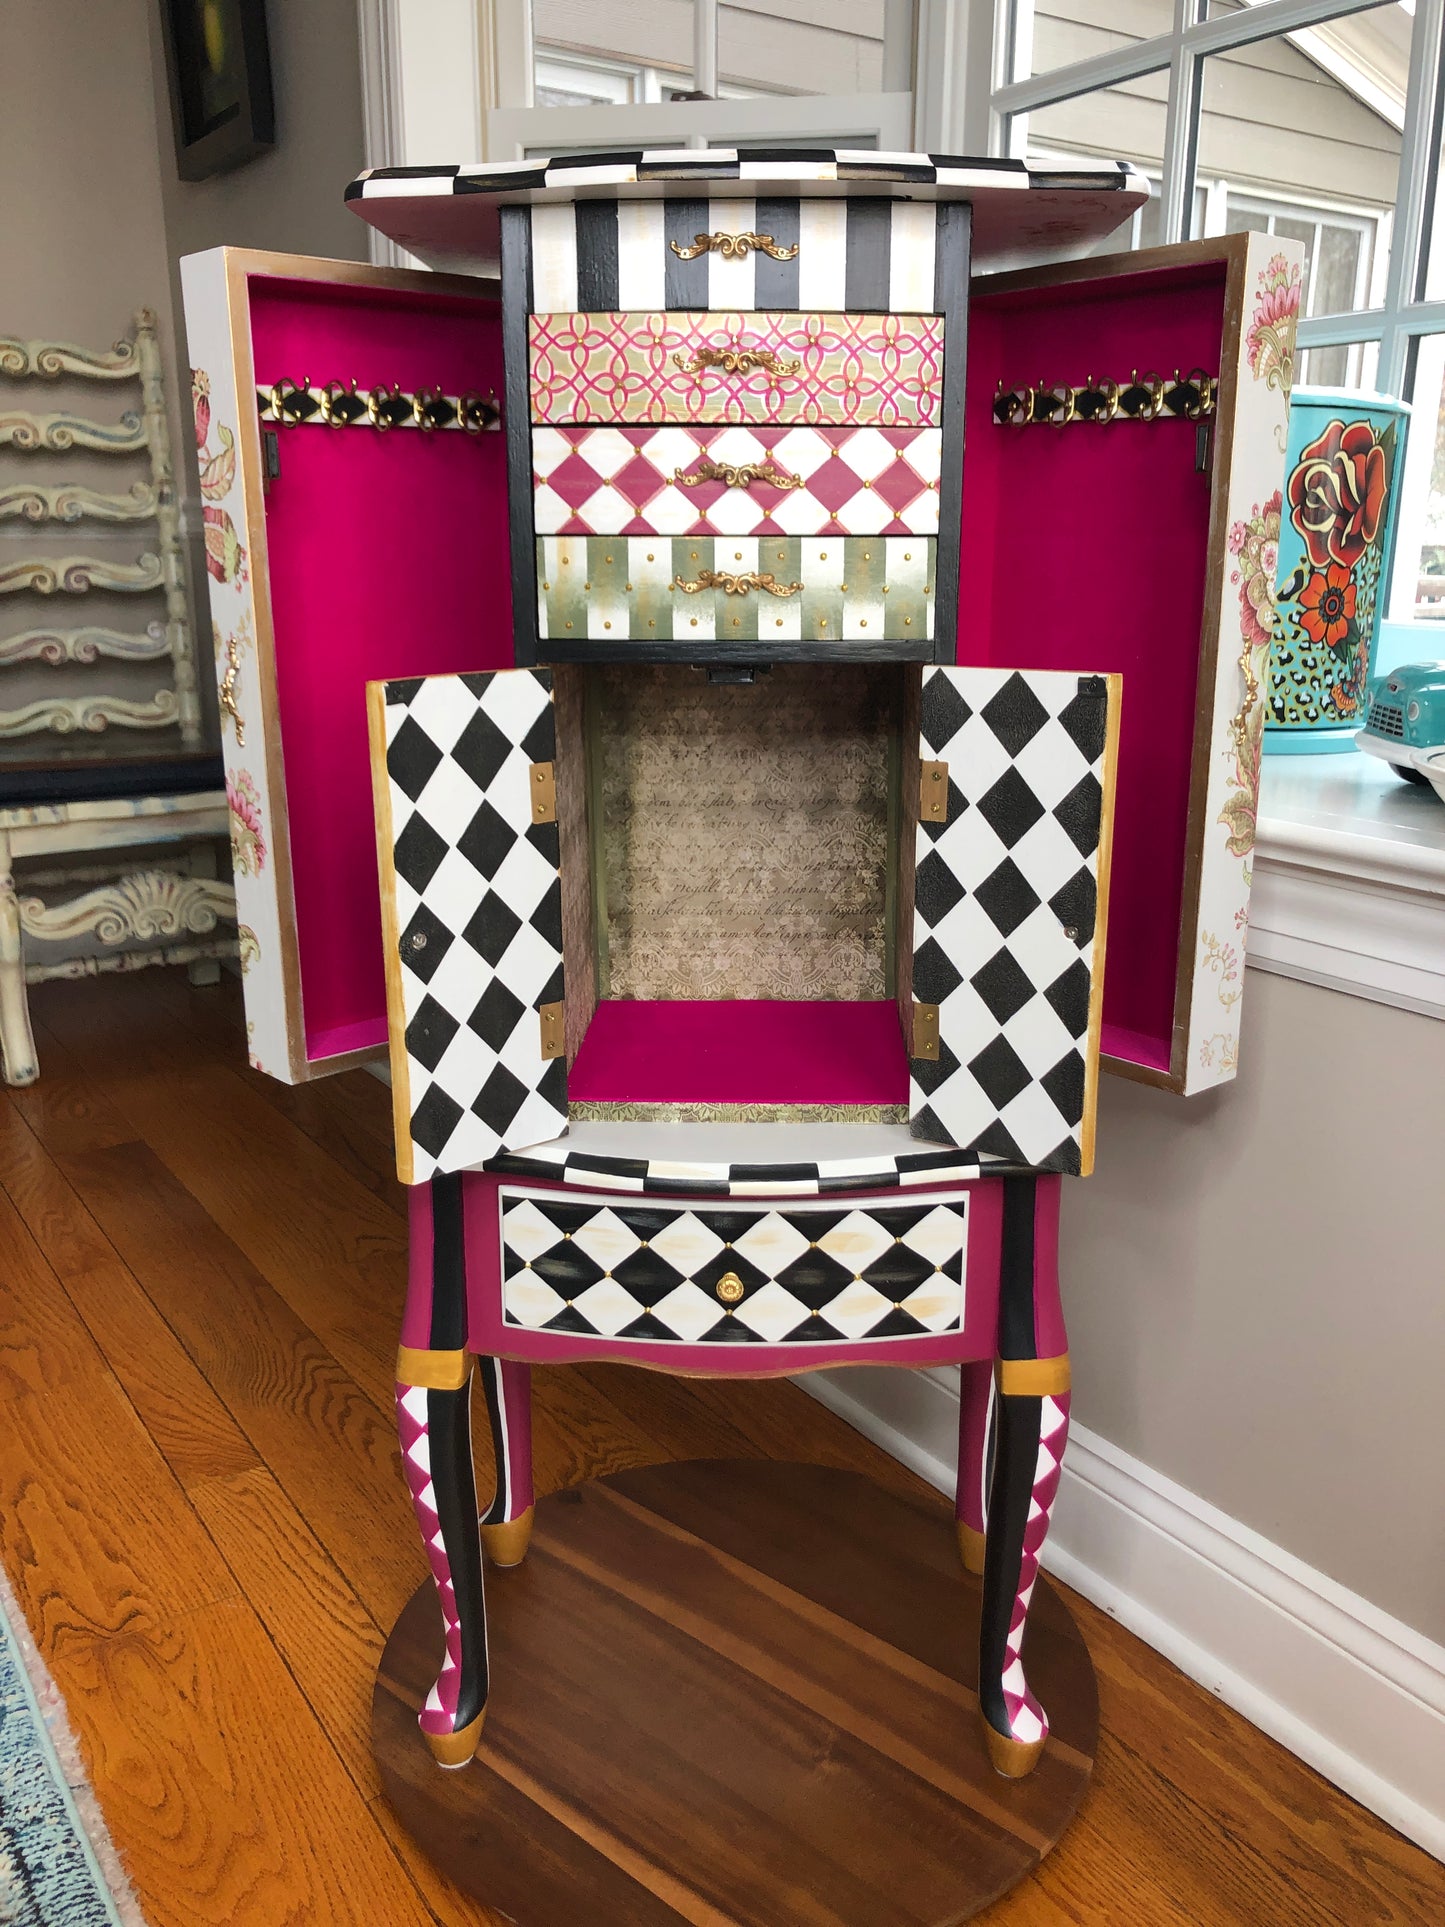 Whimsical, Harlequin Diamonds and Boho Paisley, Pink and Green and Black, Checked Patterned Jewelry Armoire